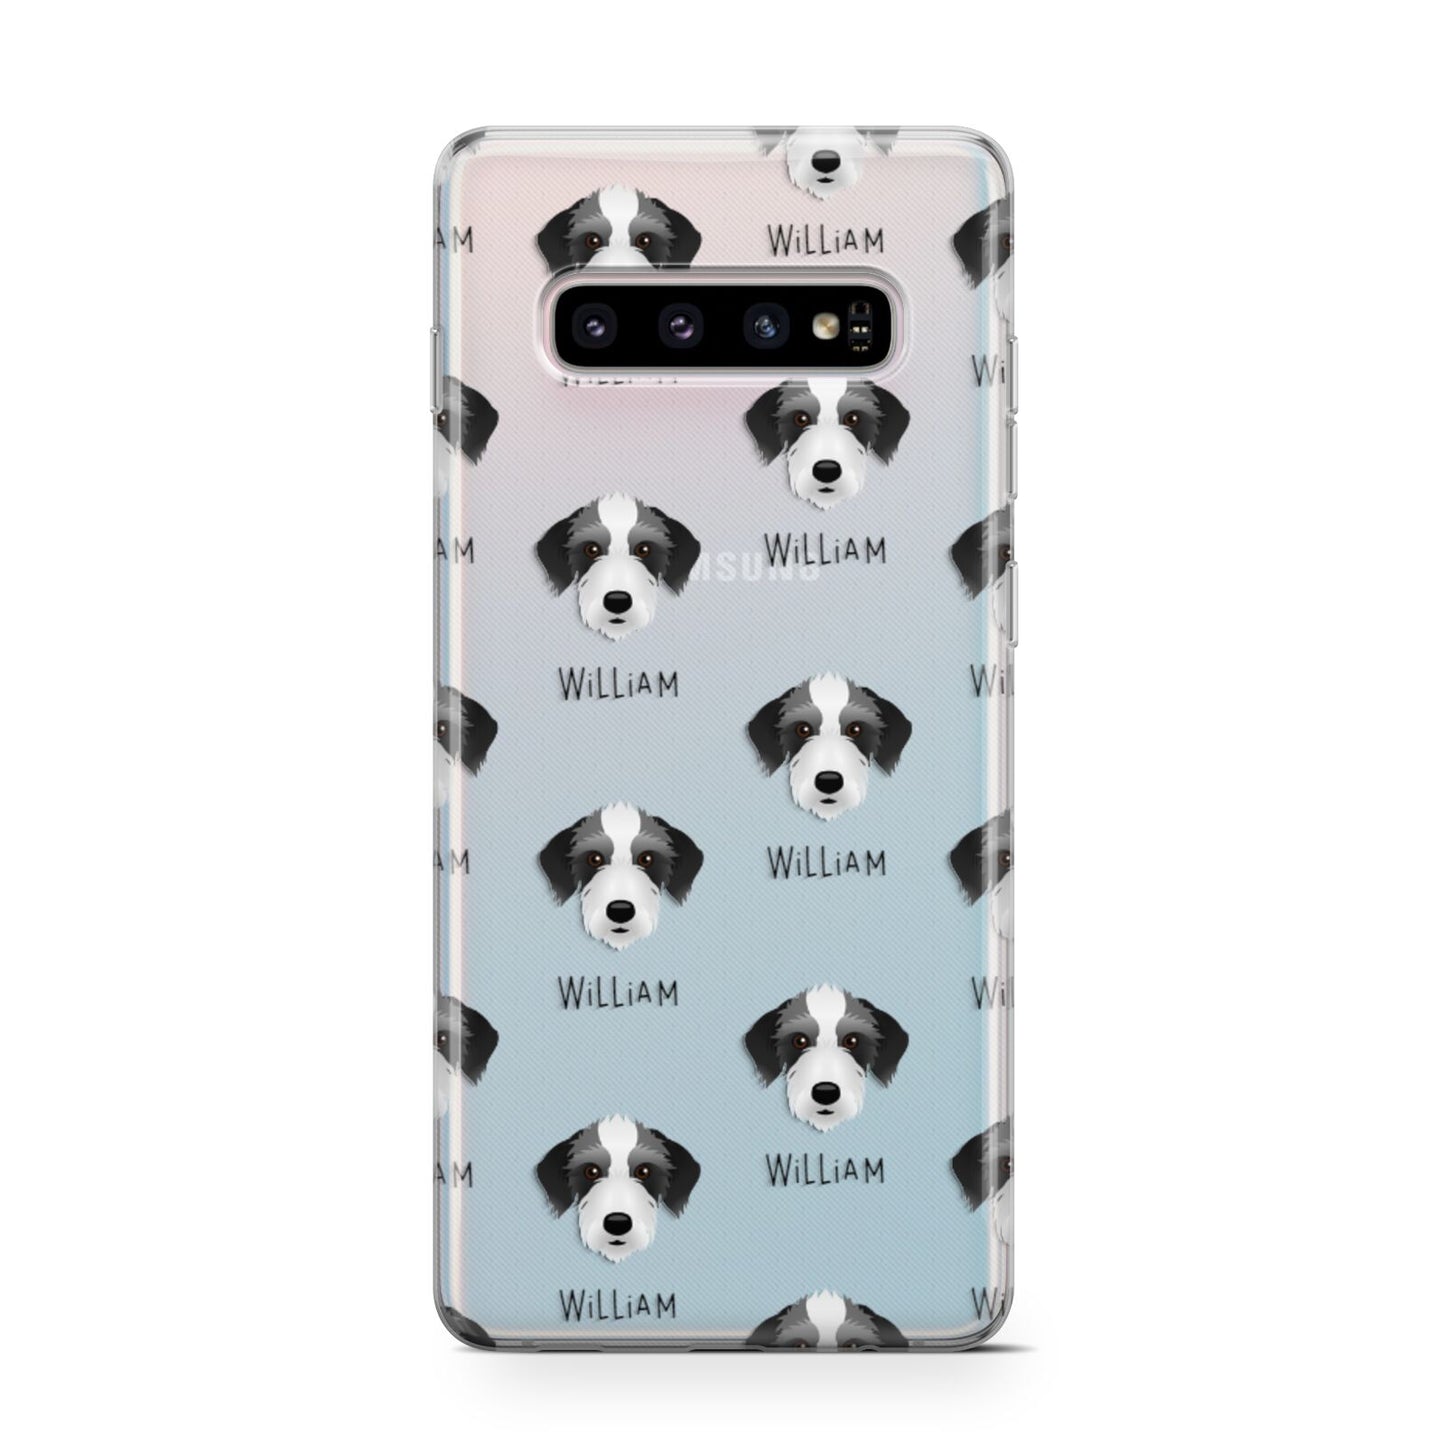 Bedlington Whippet Icon with Name Samsung Galaxy S10 Case